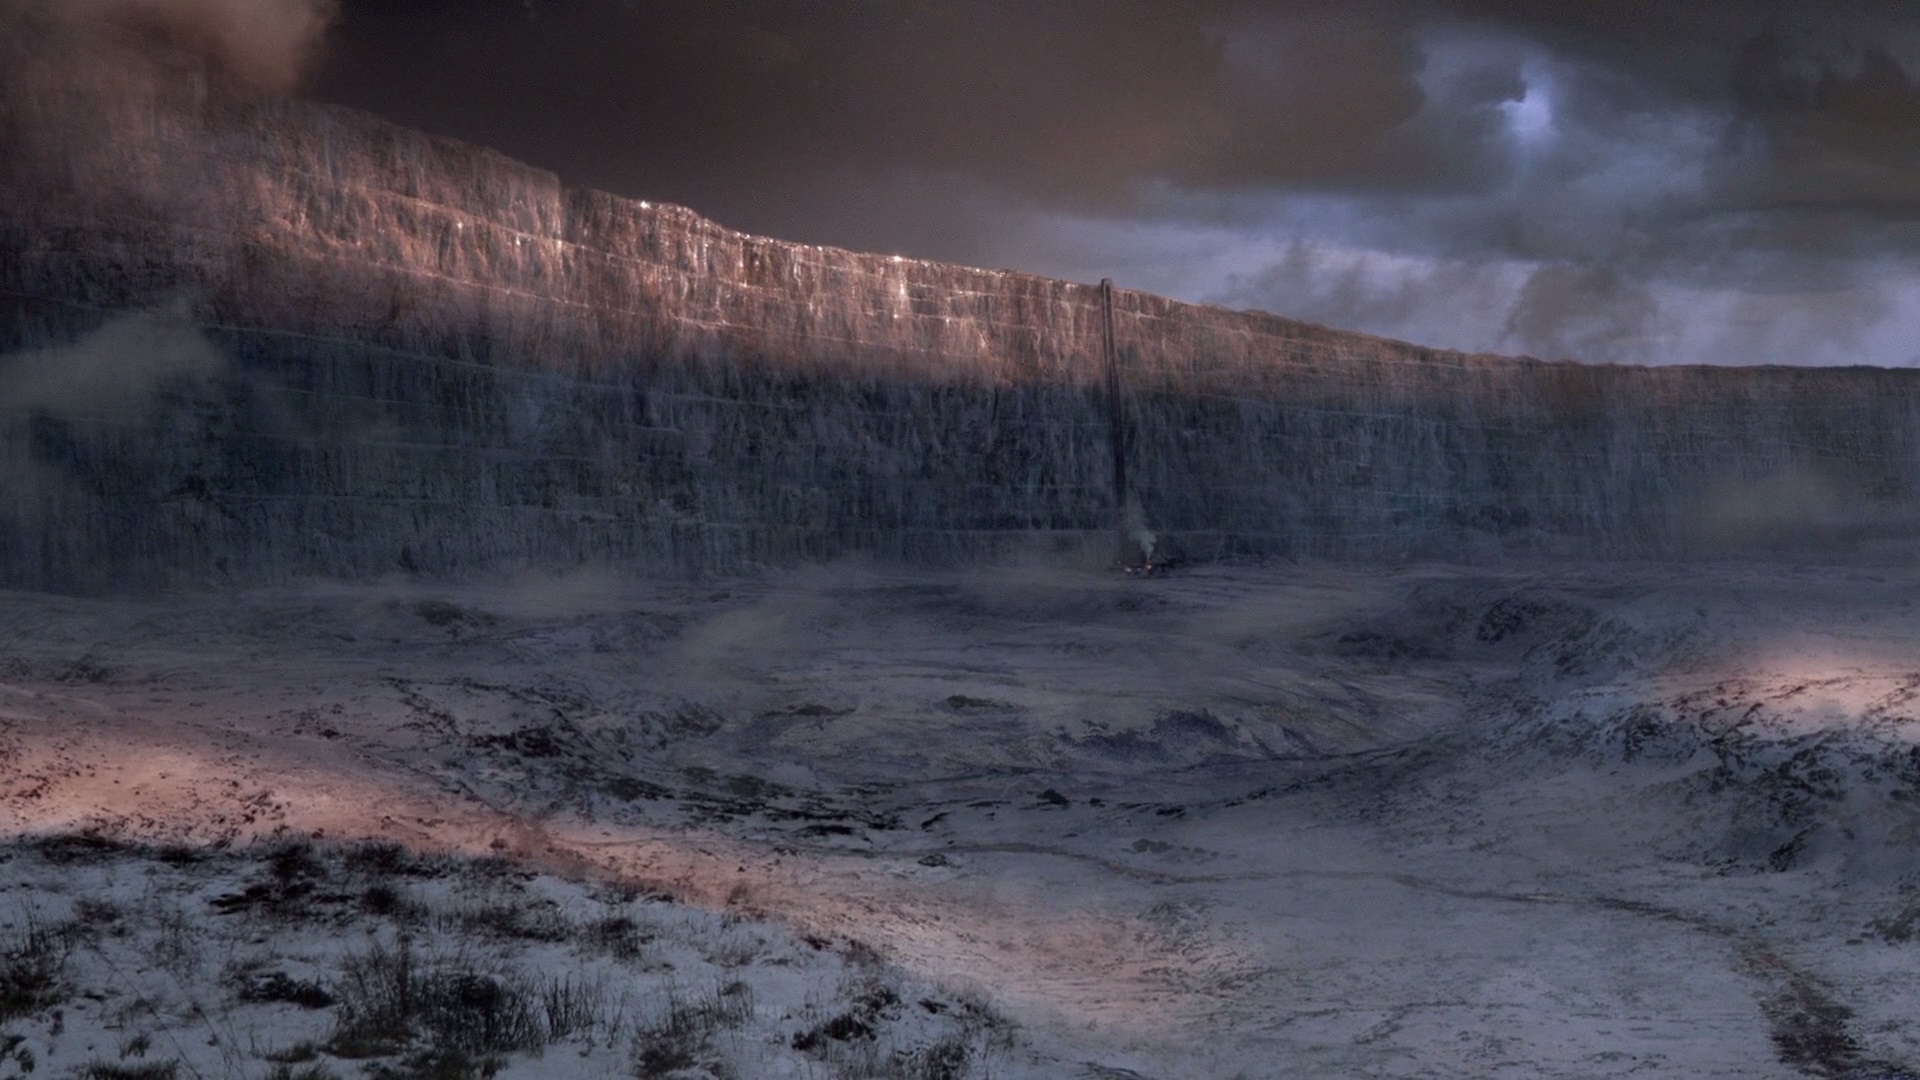 The Wall in Game Of Thrones